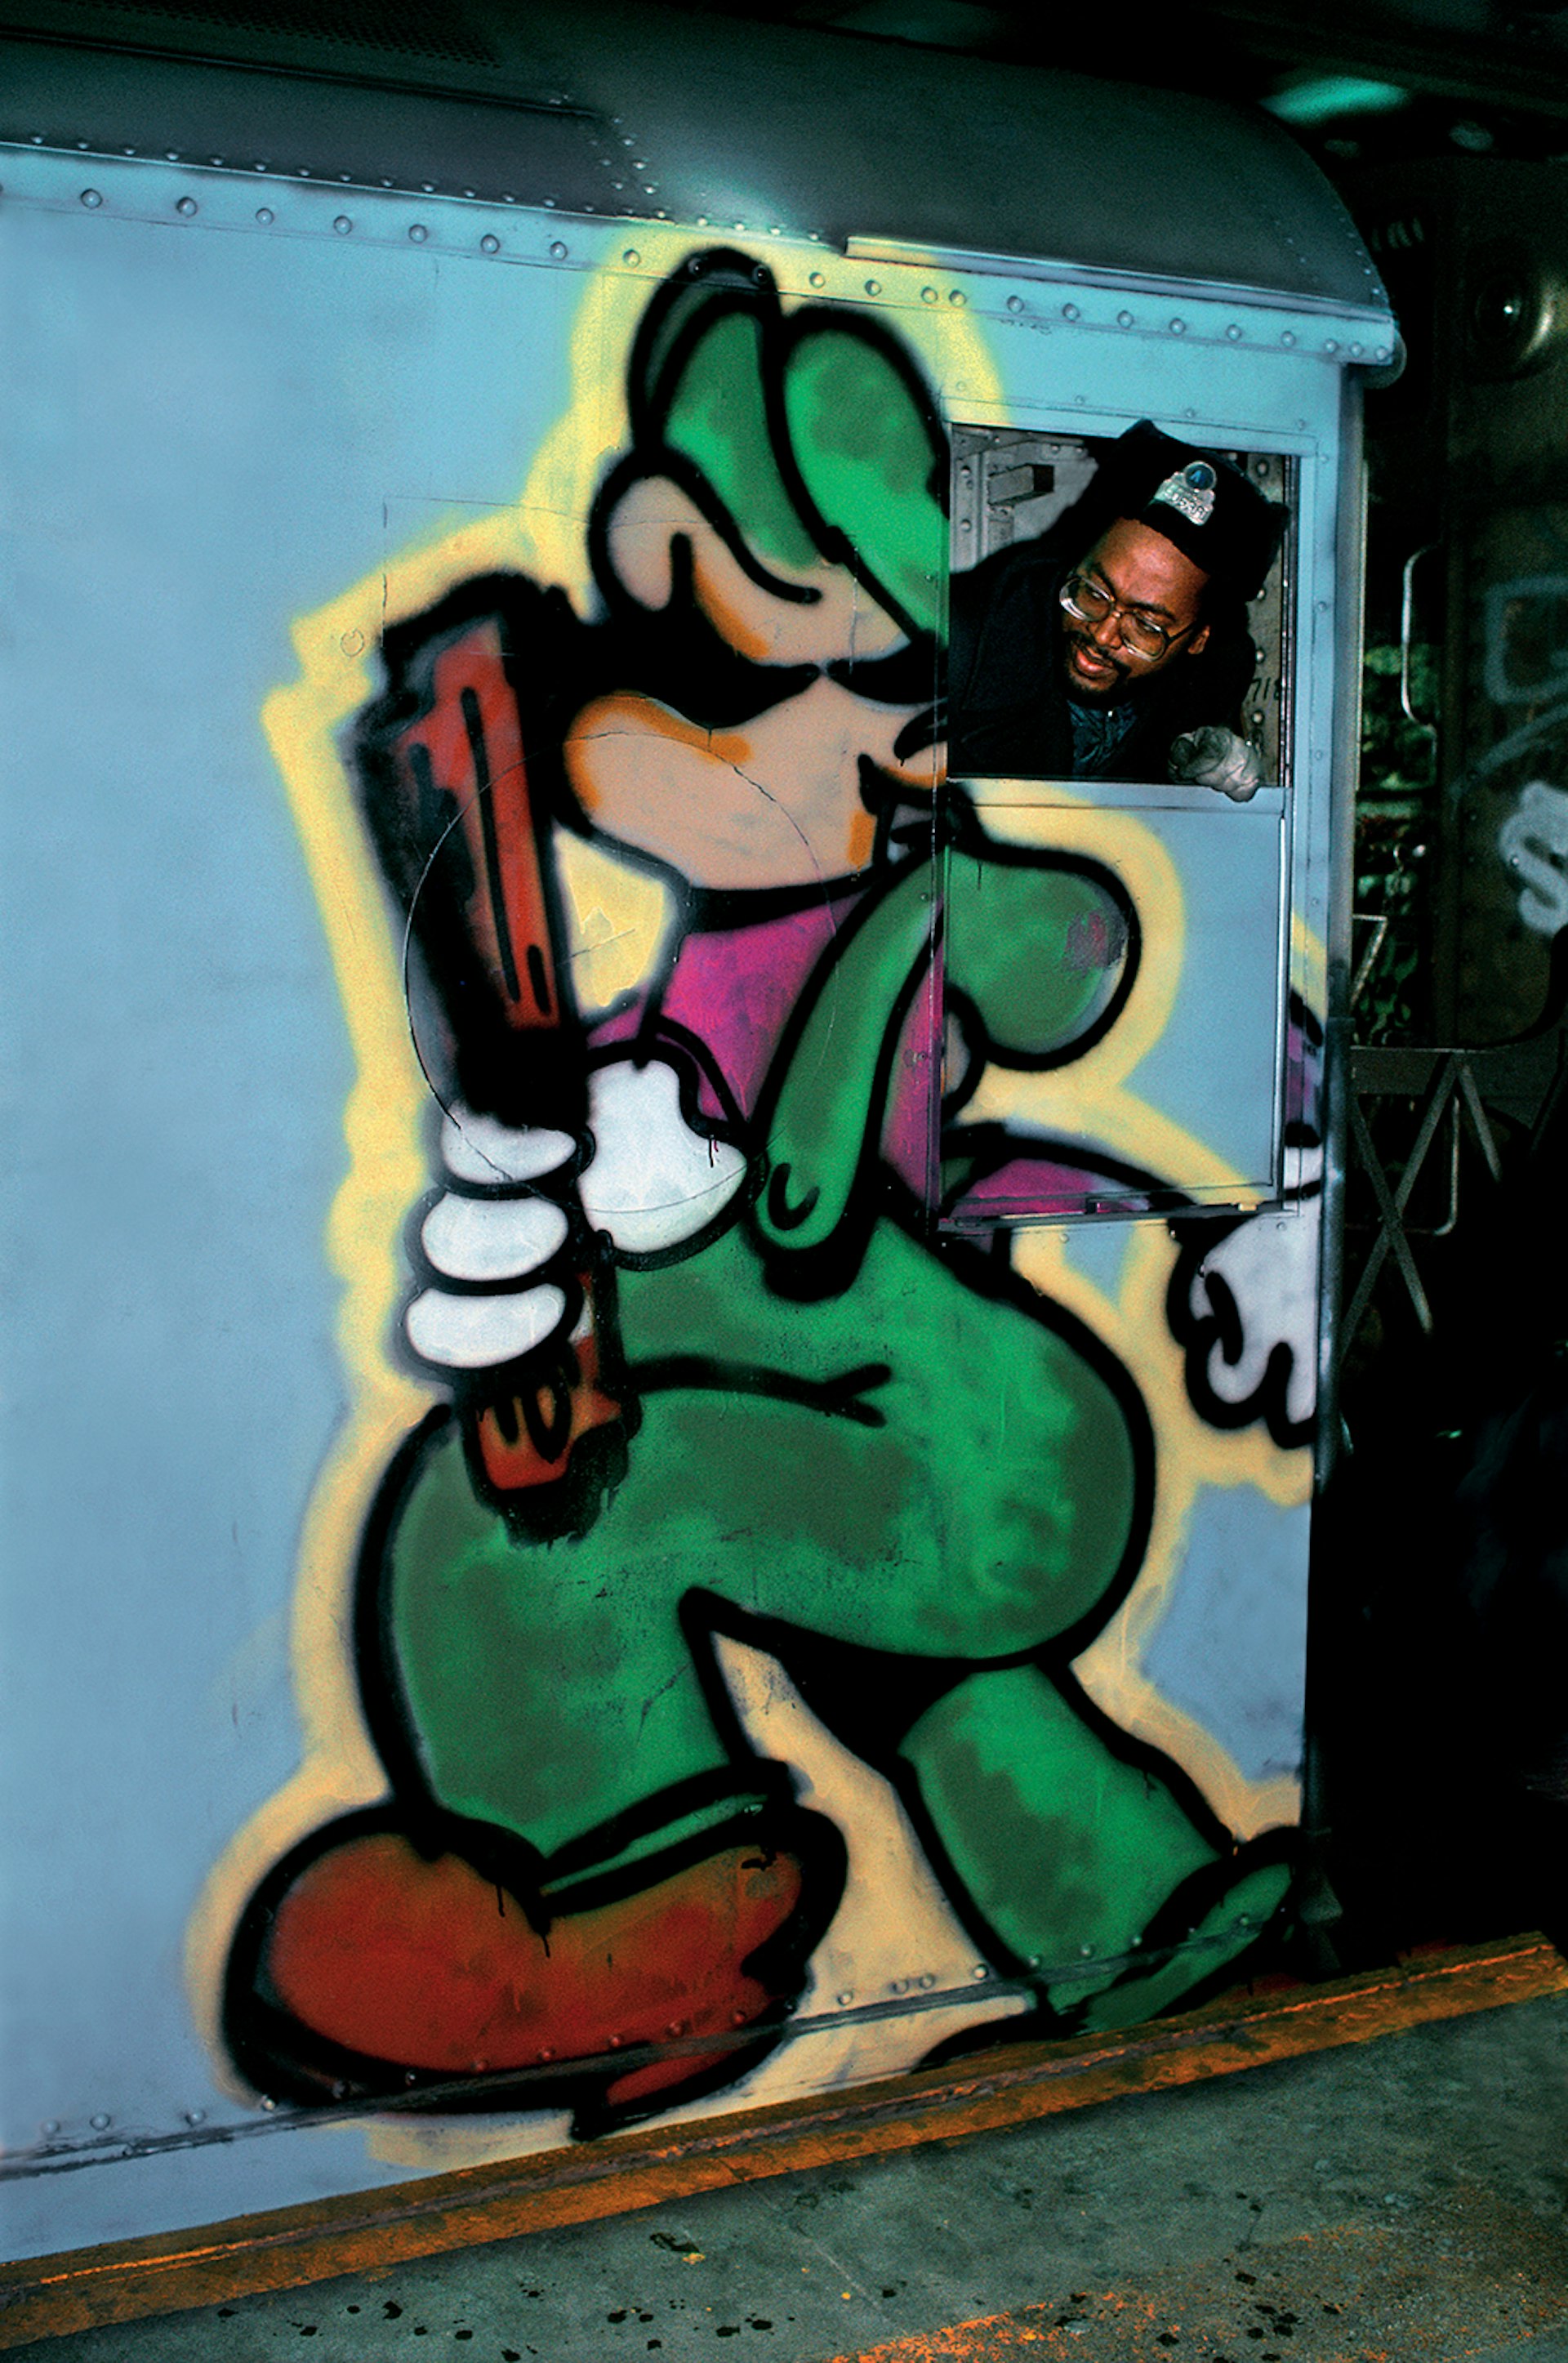 Mario character from Nintendo’s early Donkey Kong video game, by Son 1 and Rem, Manhattan, 1983. Photograph: Martha Cooper